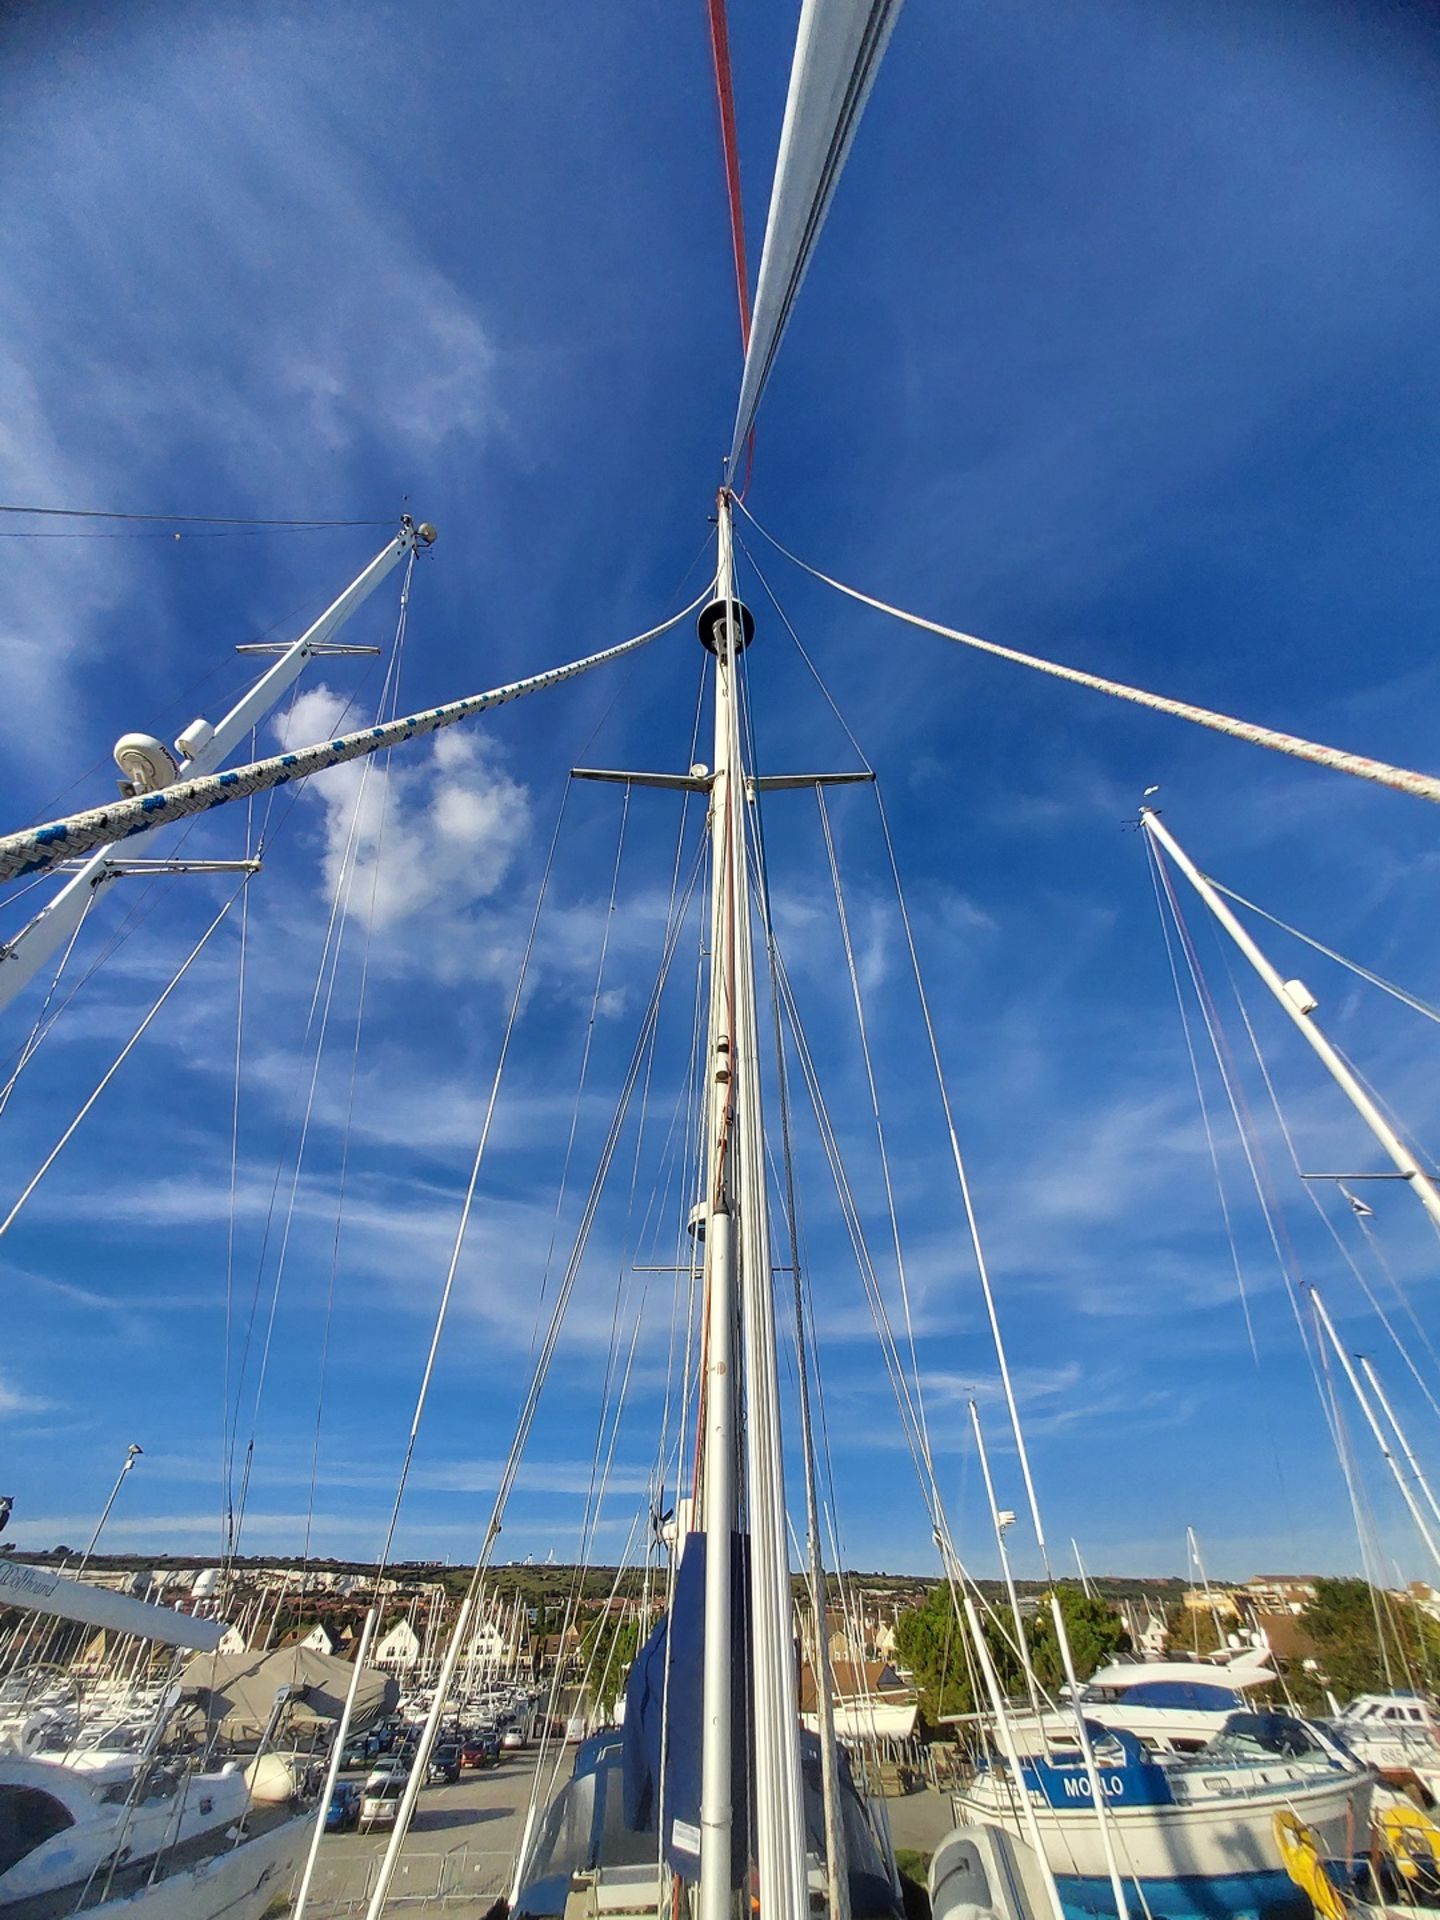 Colvic Victor 40 (commissioned 1995) ‘Silver Wind’ - Image 20 of 57